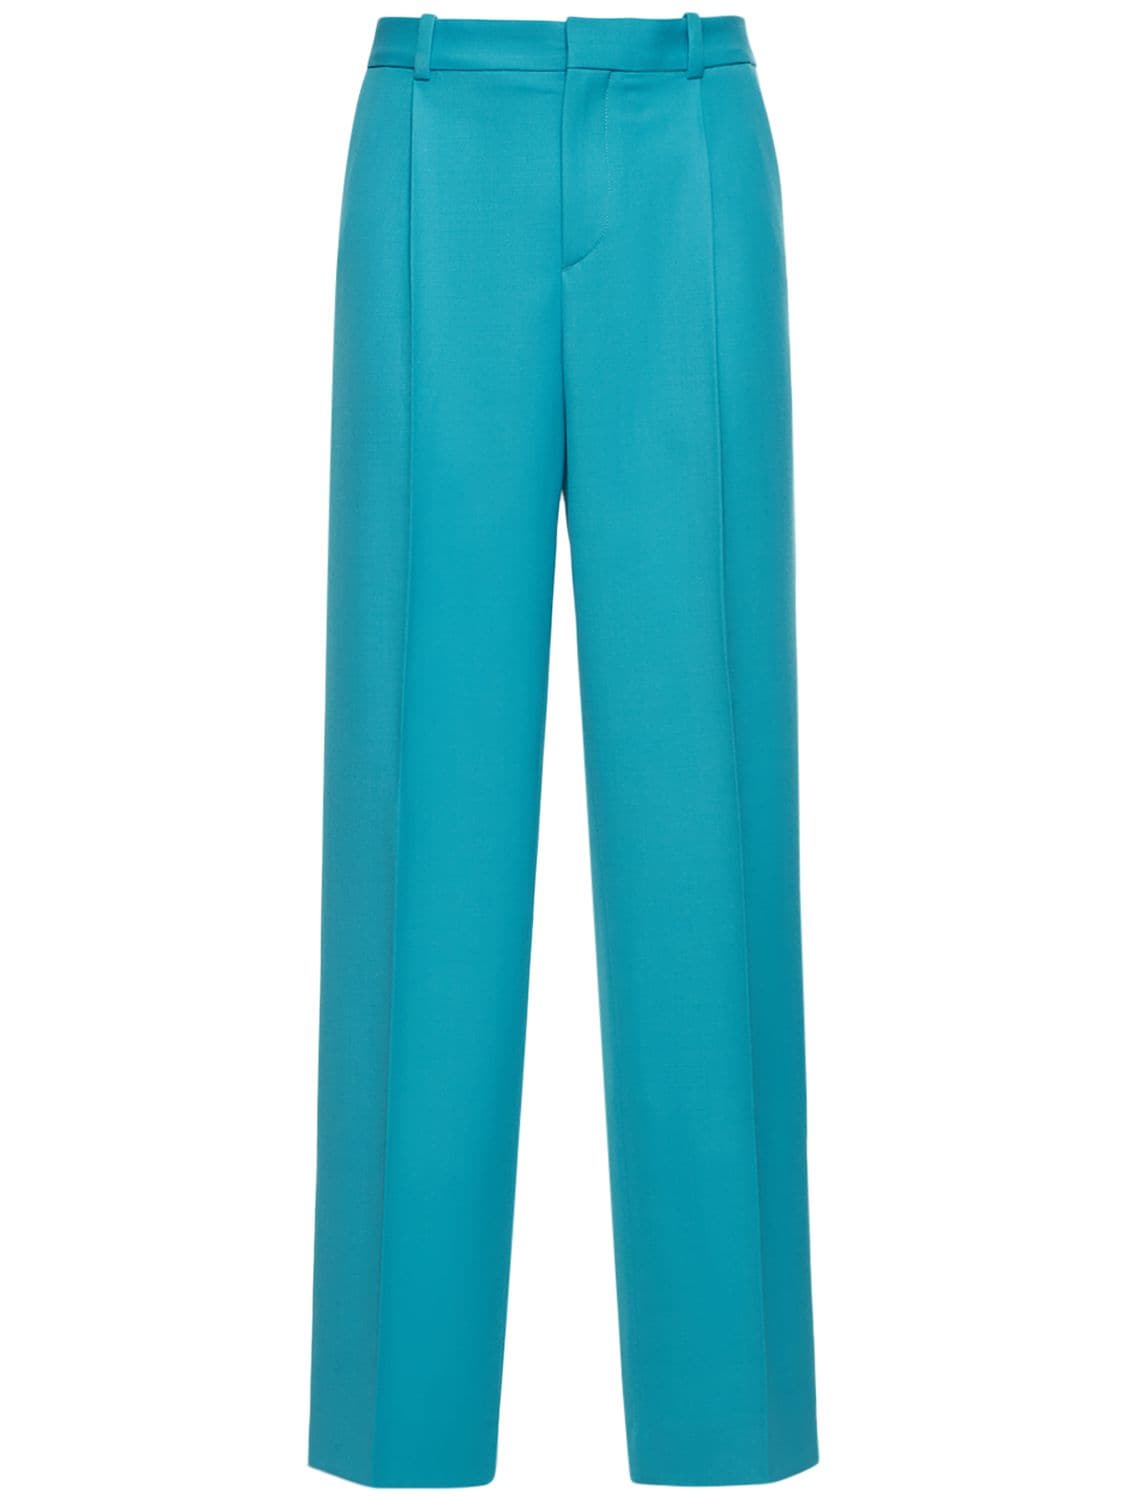 BOTTER PLEATED WOOL FORMAL PANTS